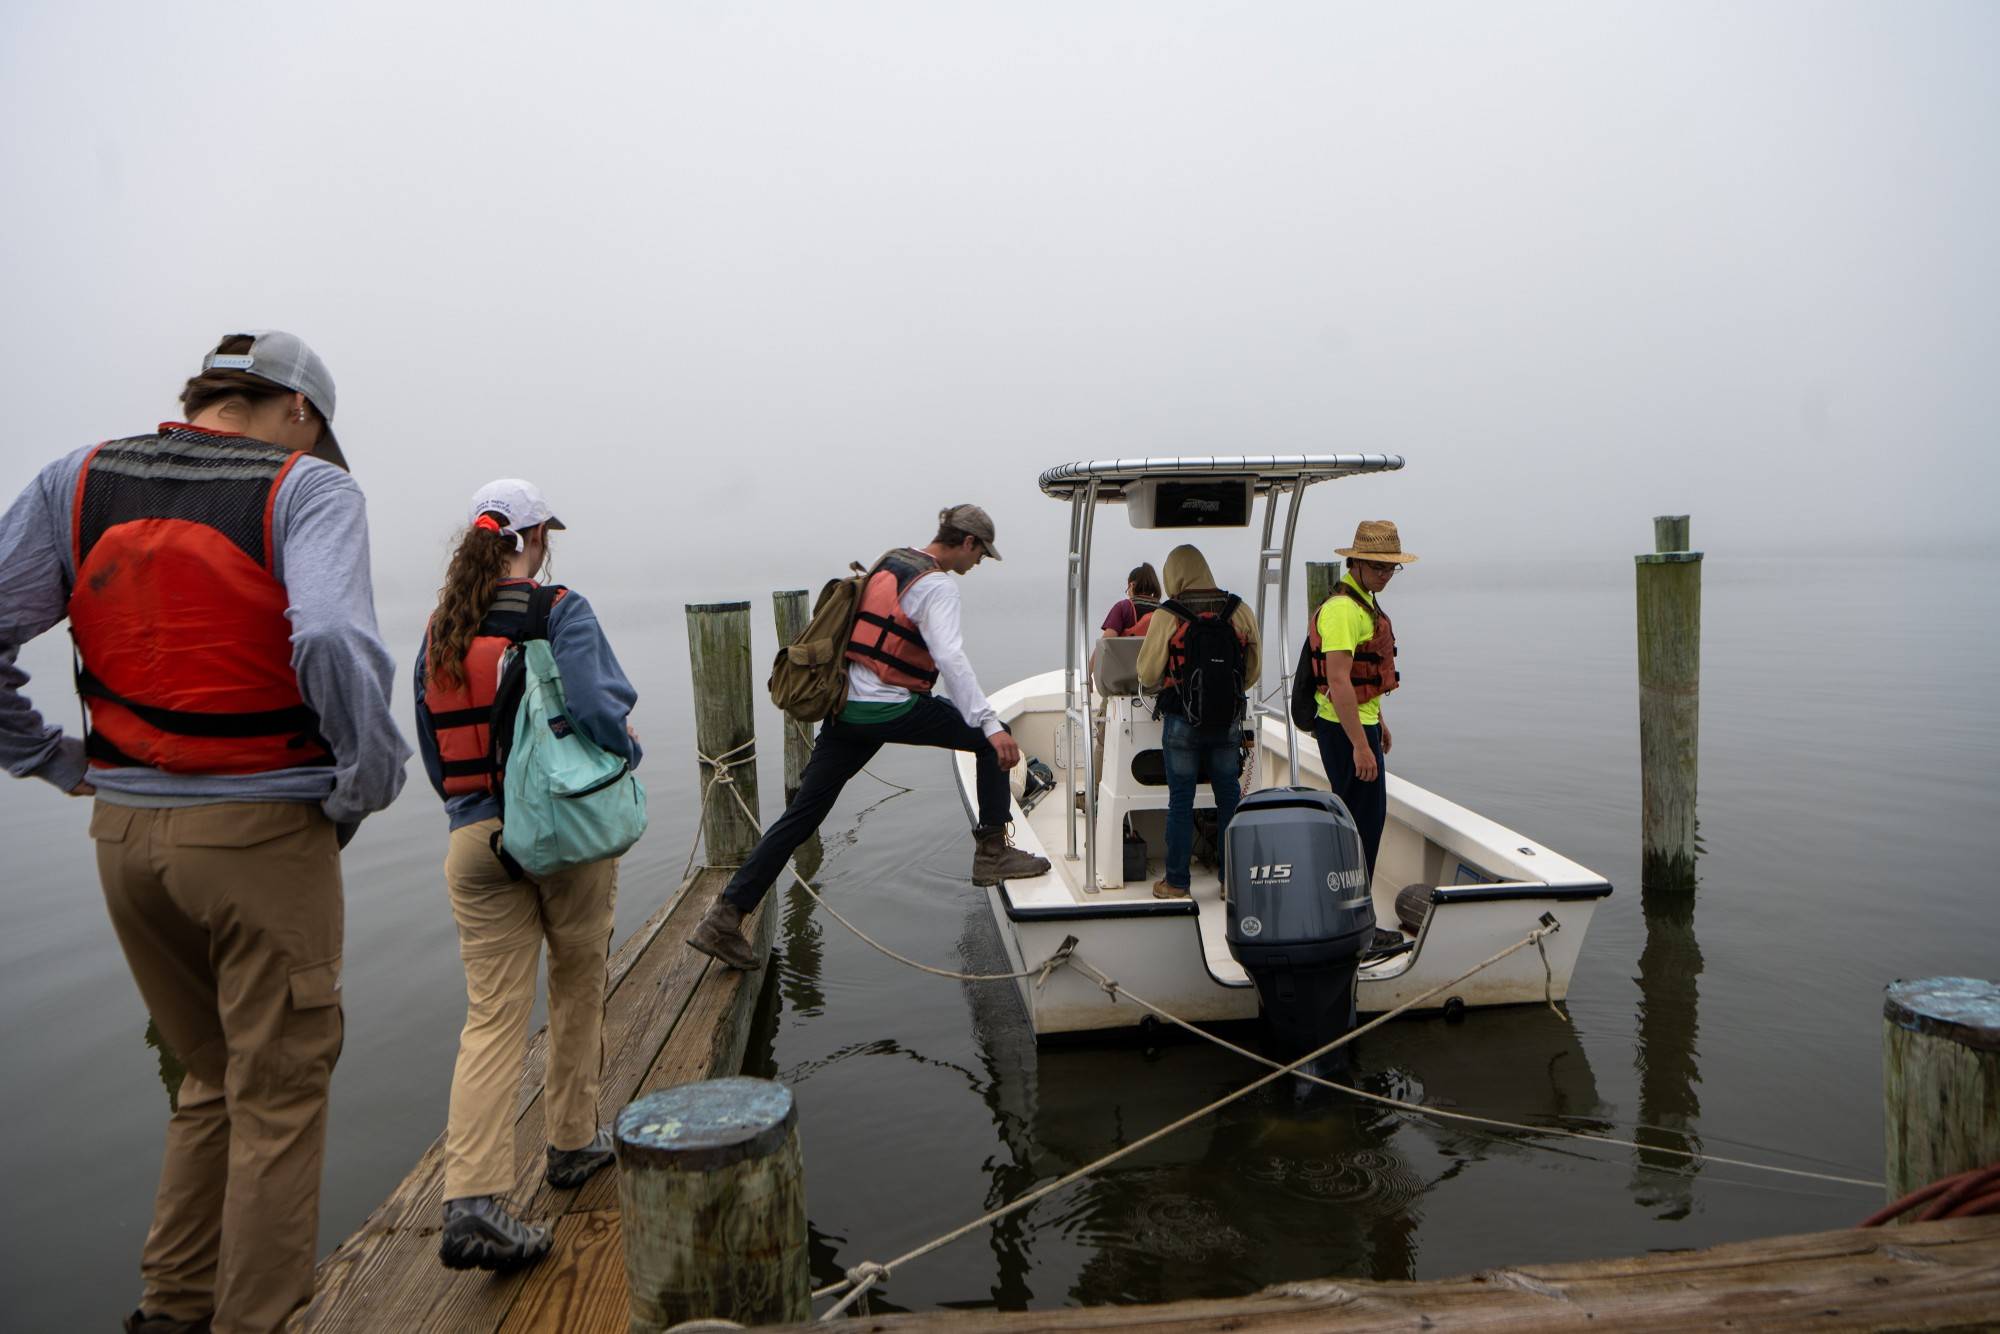 Wildlife biology students put conservation into practice with Chesapeake Bay terrapins